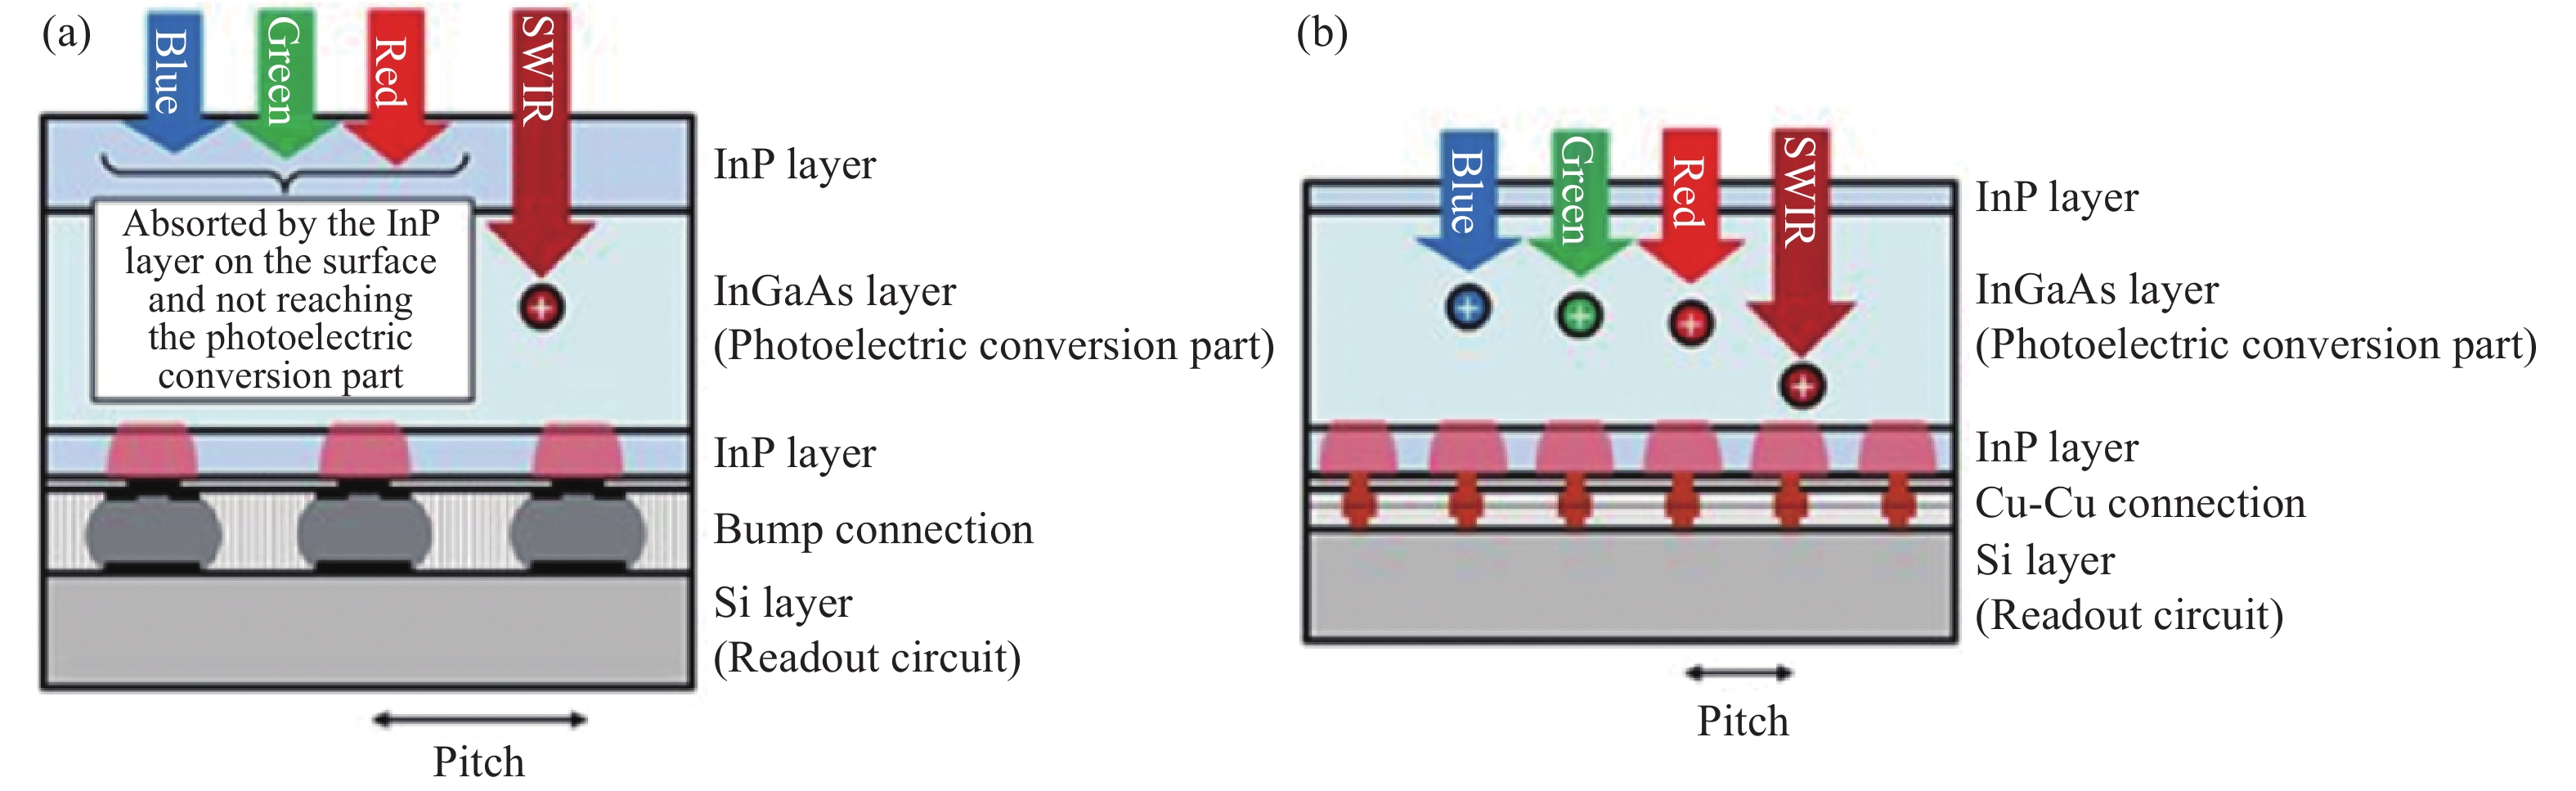 Traditional flip chip bonding technology via indium (a) and SONY's copper-copper connection technology (b)